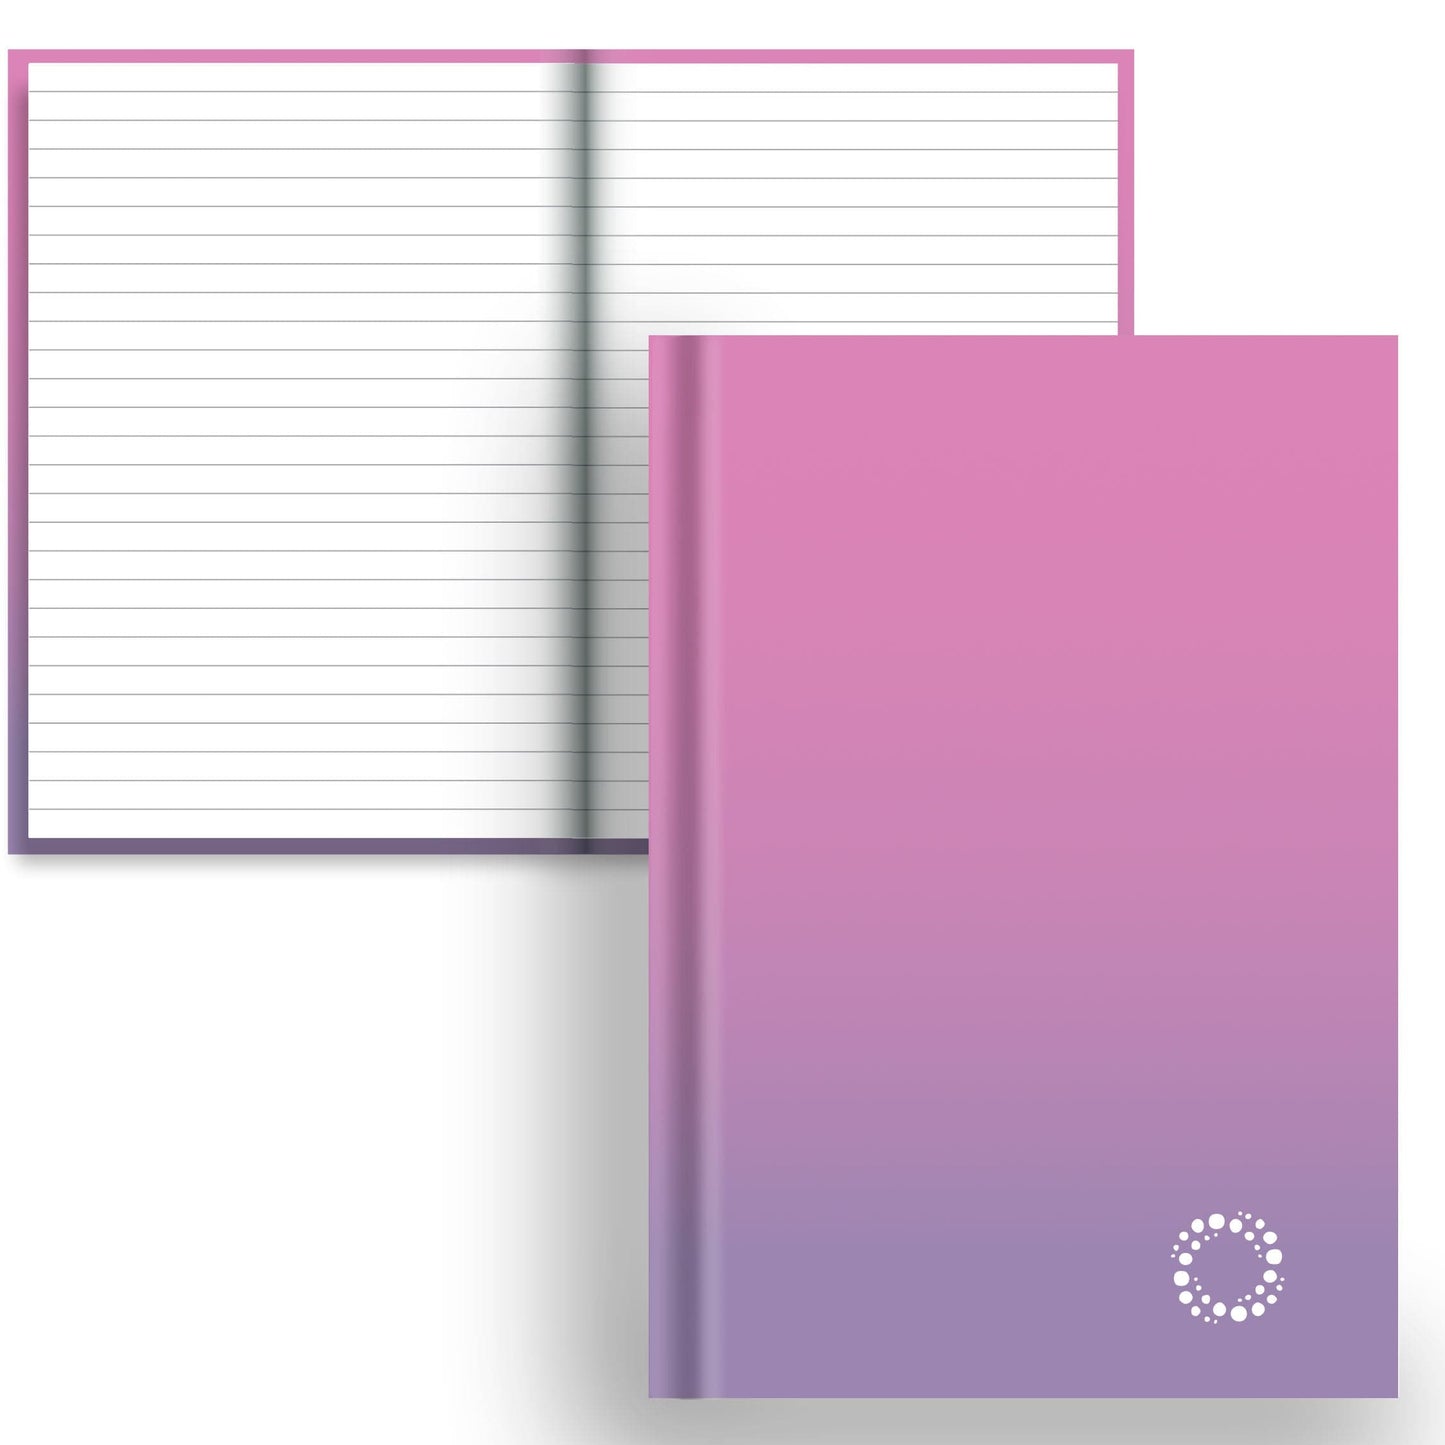 DayDot Journals Colour Fade Lined Paper Blossom and Periwinkle - A5 Hardcover Notebook